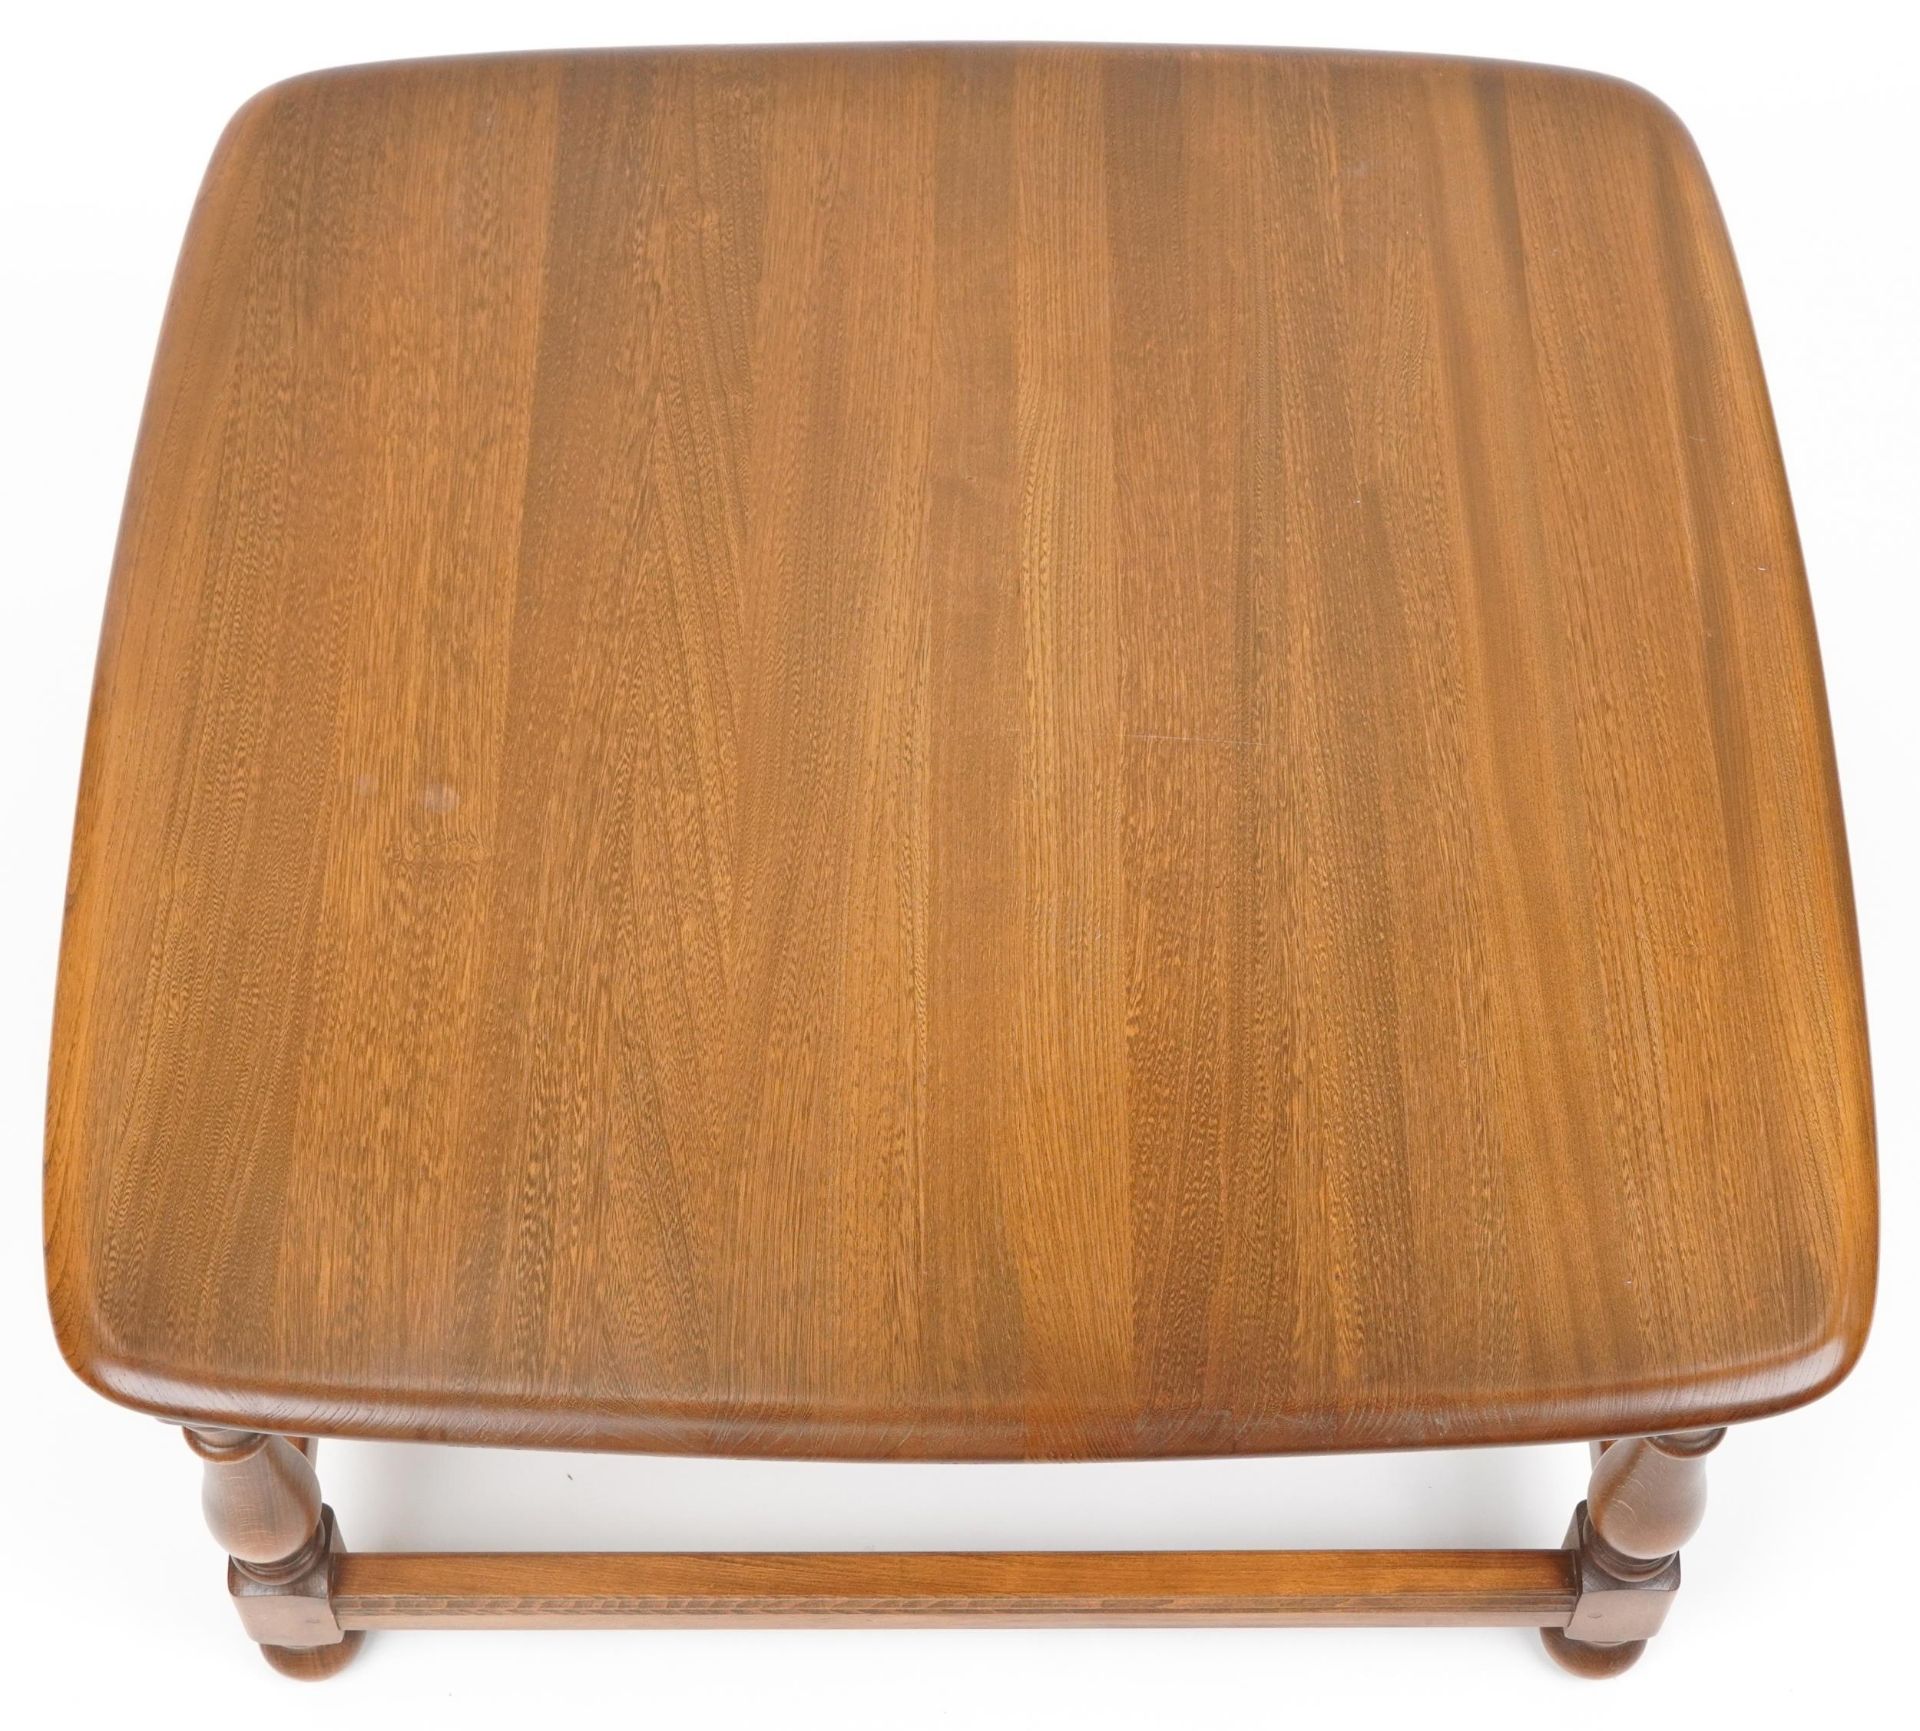 Ercol elm coffee table with square top, 38cm high x 75cm square - Image 3 of 5